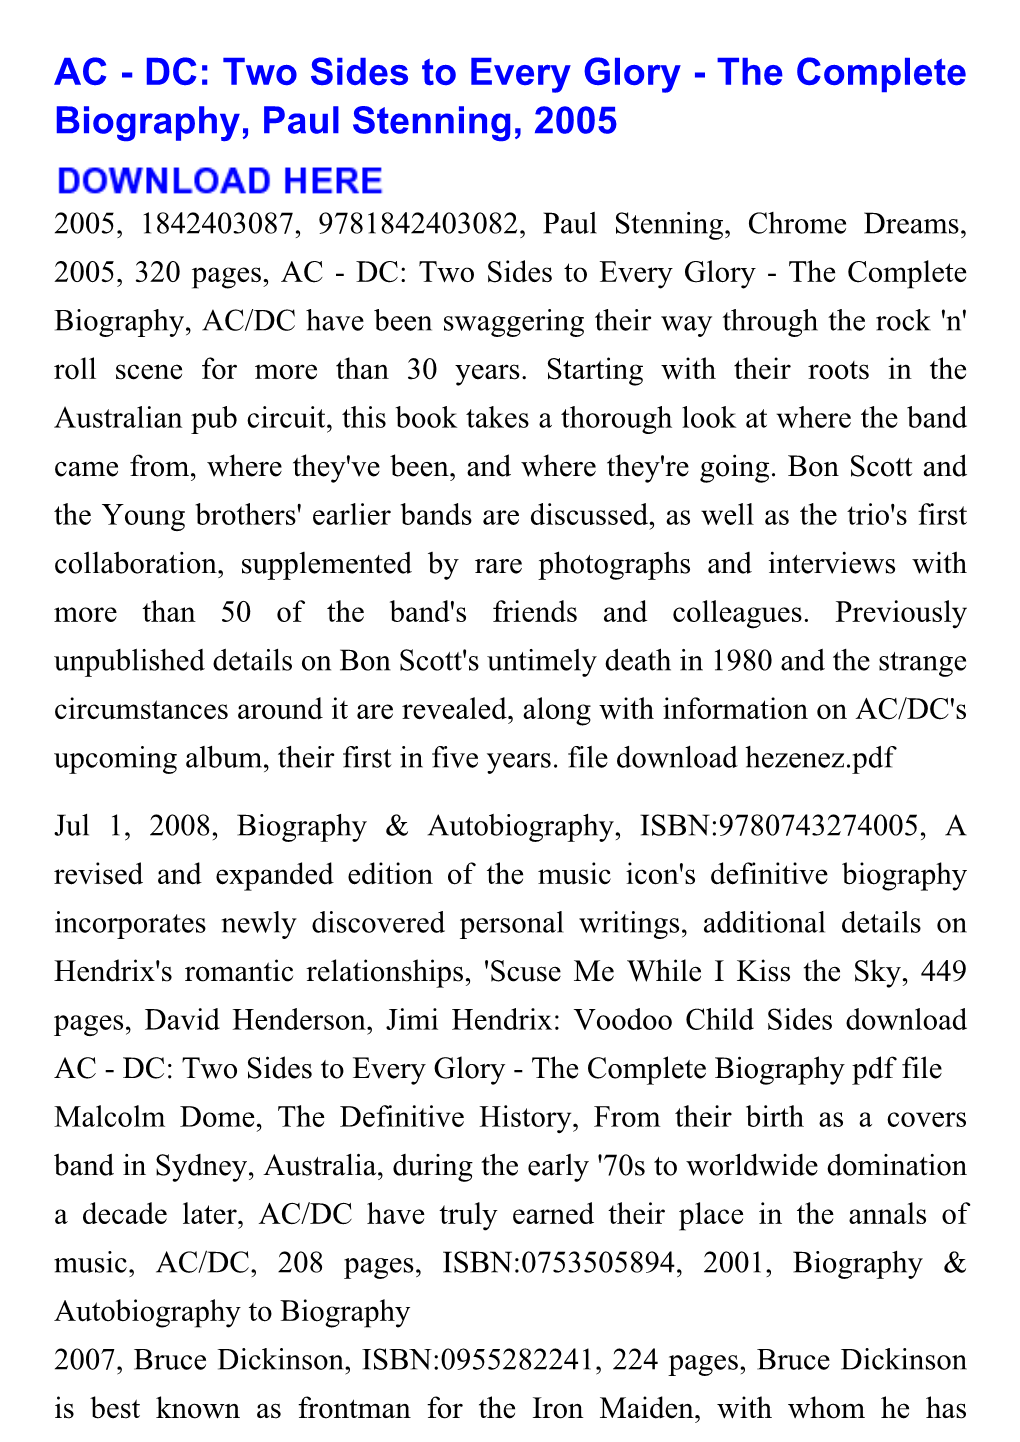 AC - DC: Two Sides to Every Glory - the Complete Biography, Paul Stenning, 2005